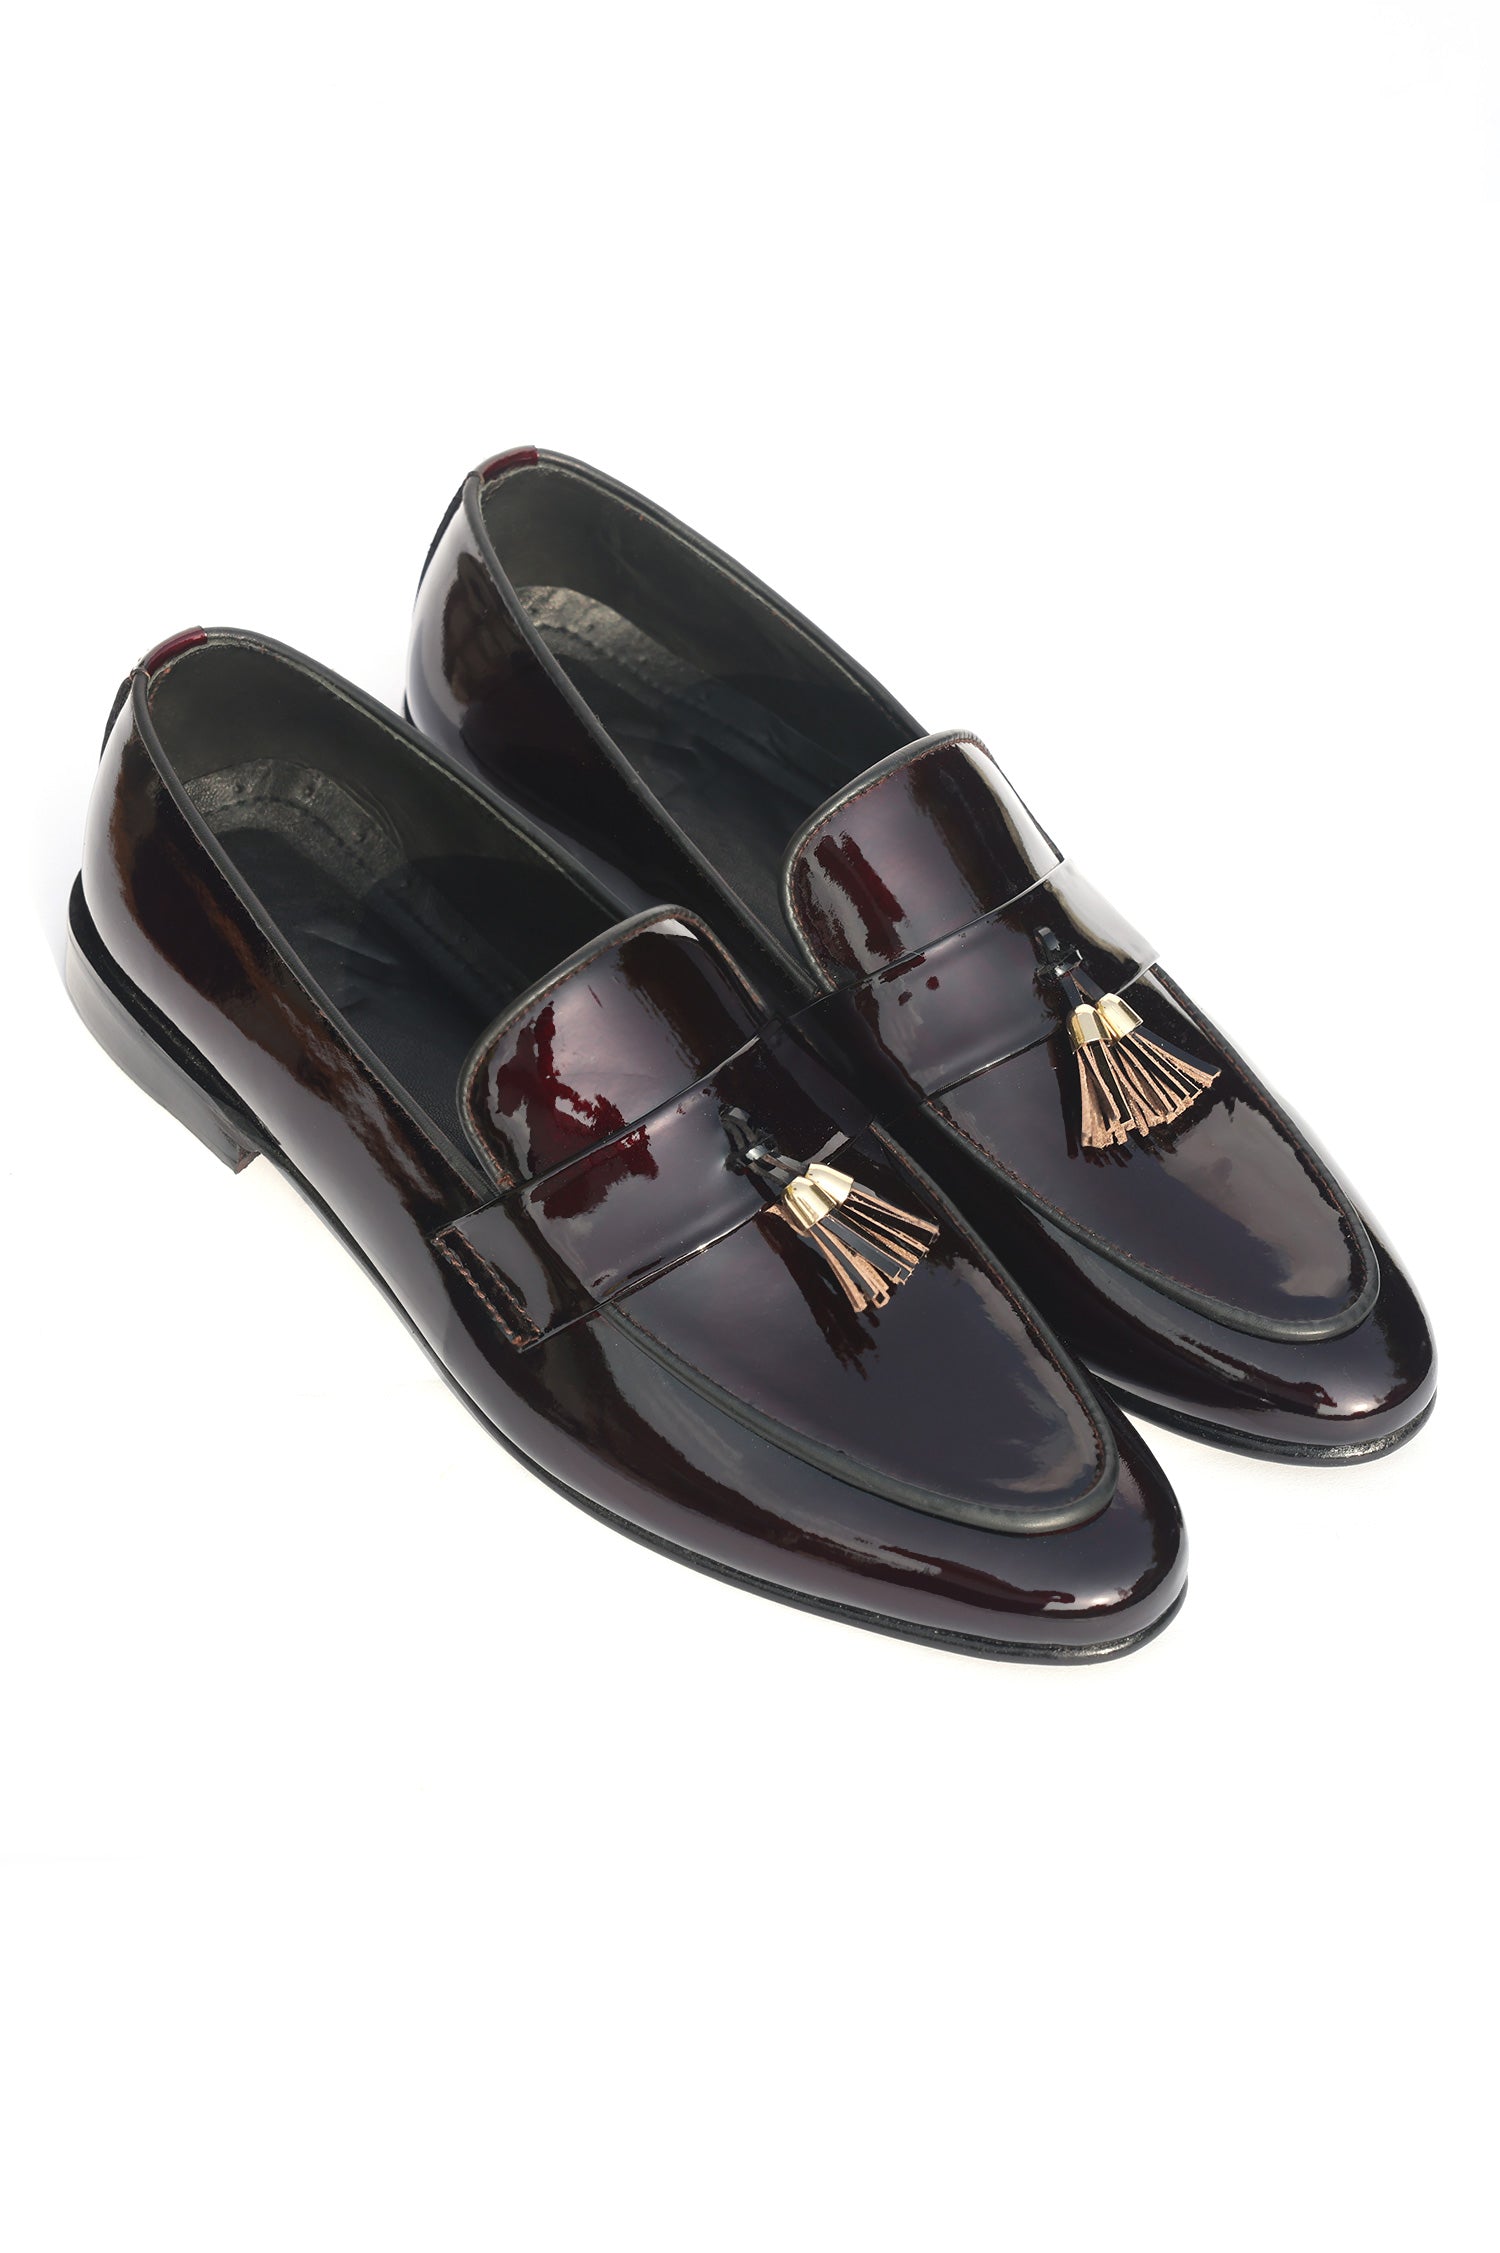 PATENT LEATHER TASSEL LOAFERS-WINE